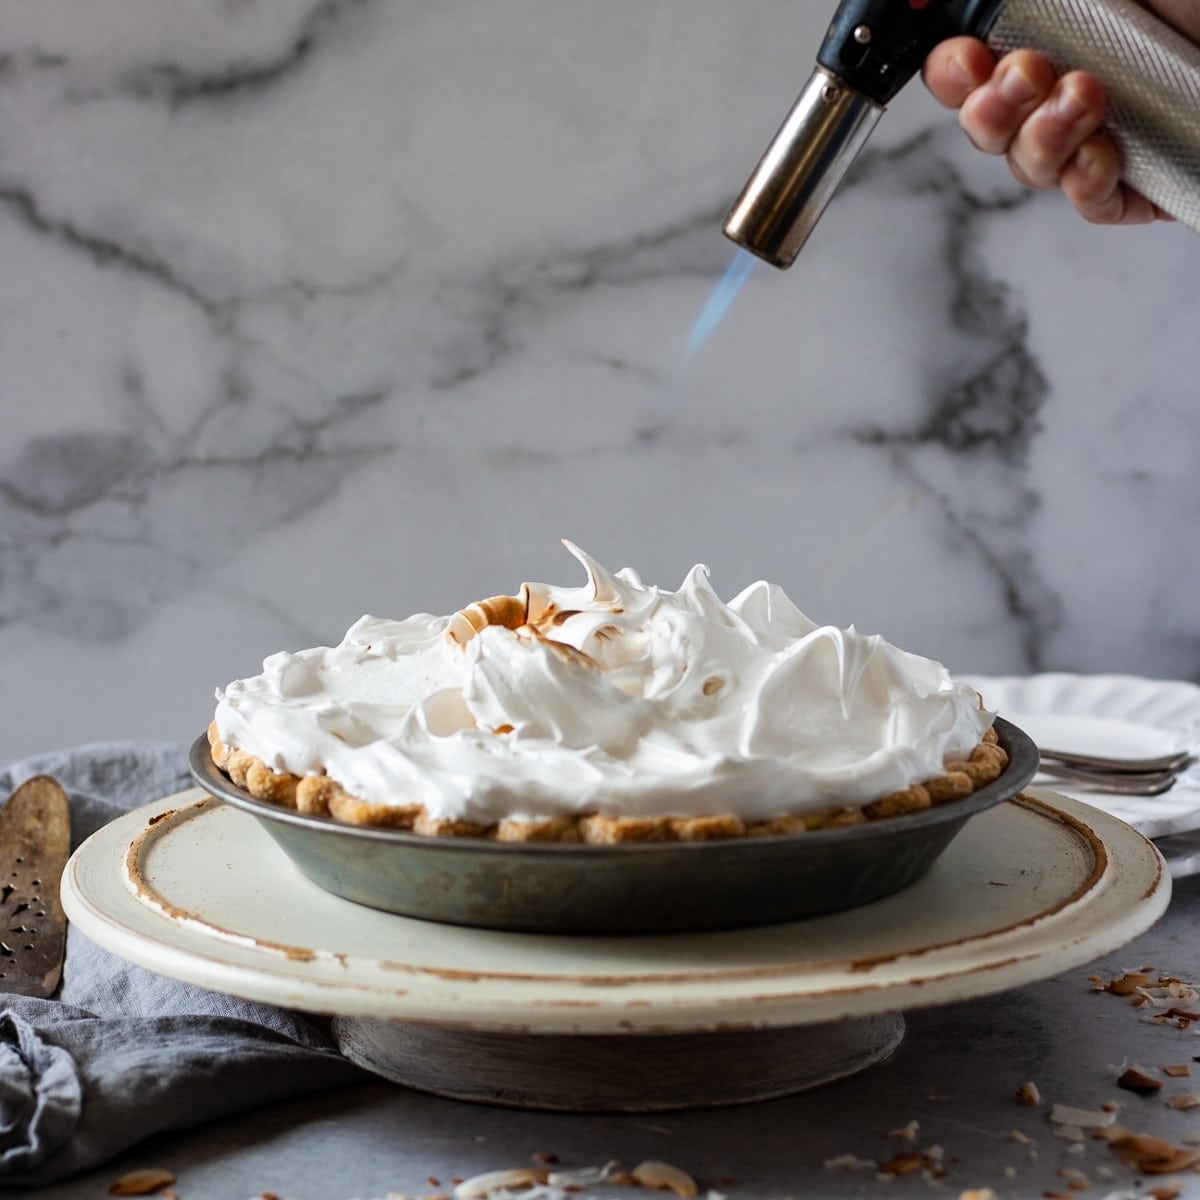 marshmallow meringue being toasted on coconut cream pie